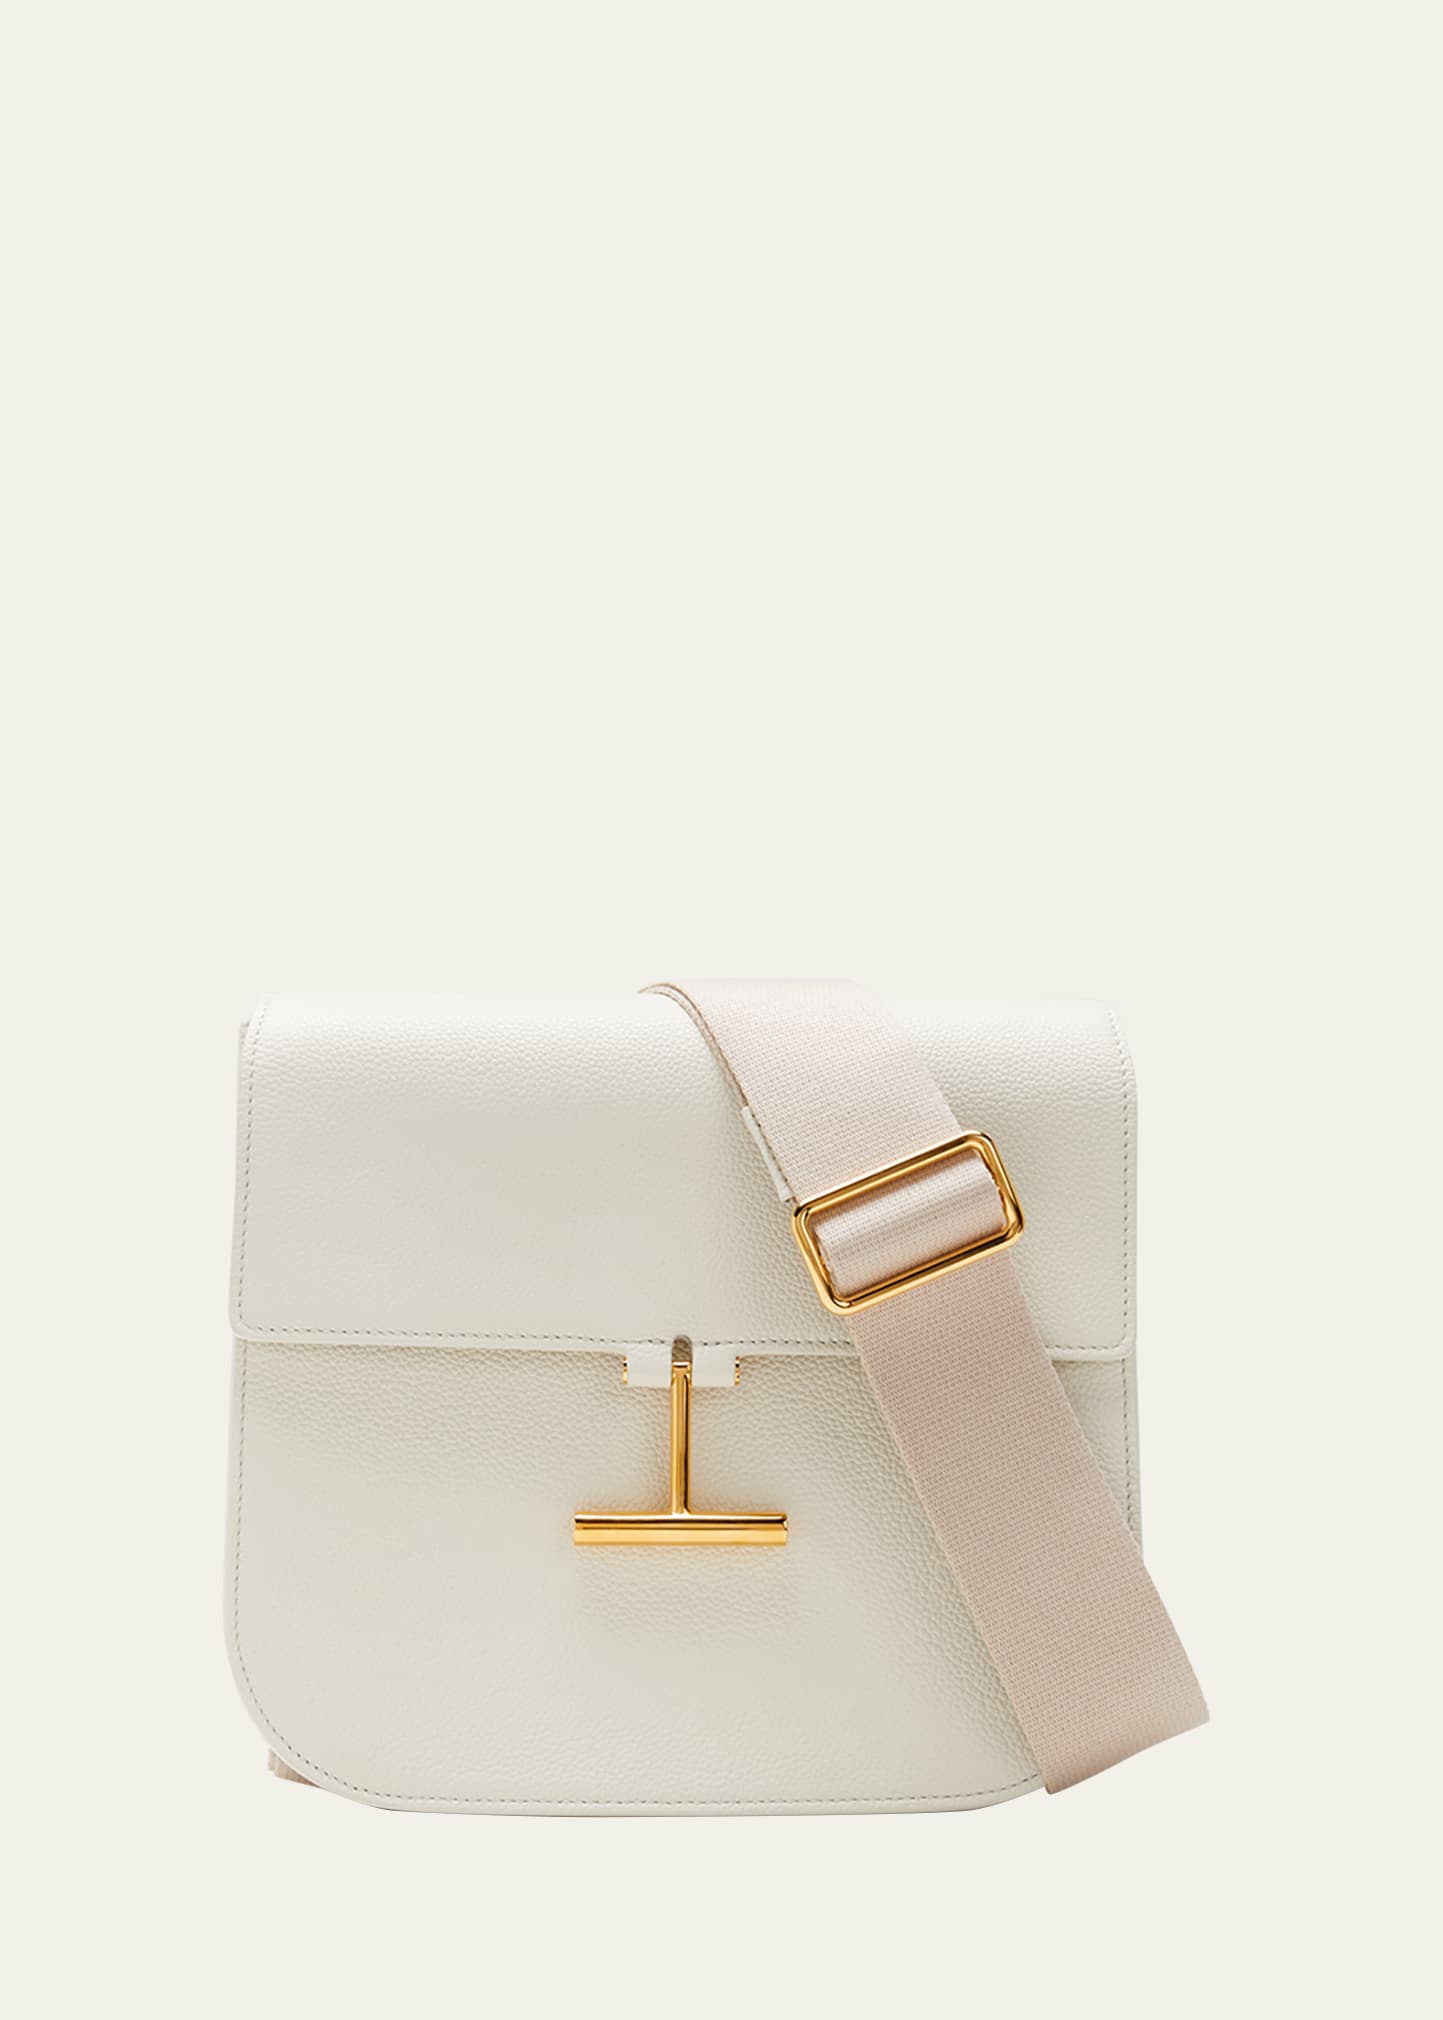 Tom Ford Tara Medium Crossbody In Grained Leather With Webbed Strap In Chalk